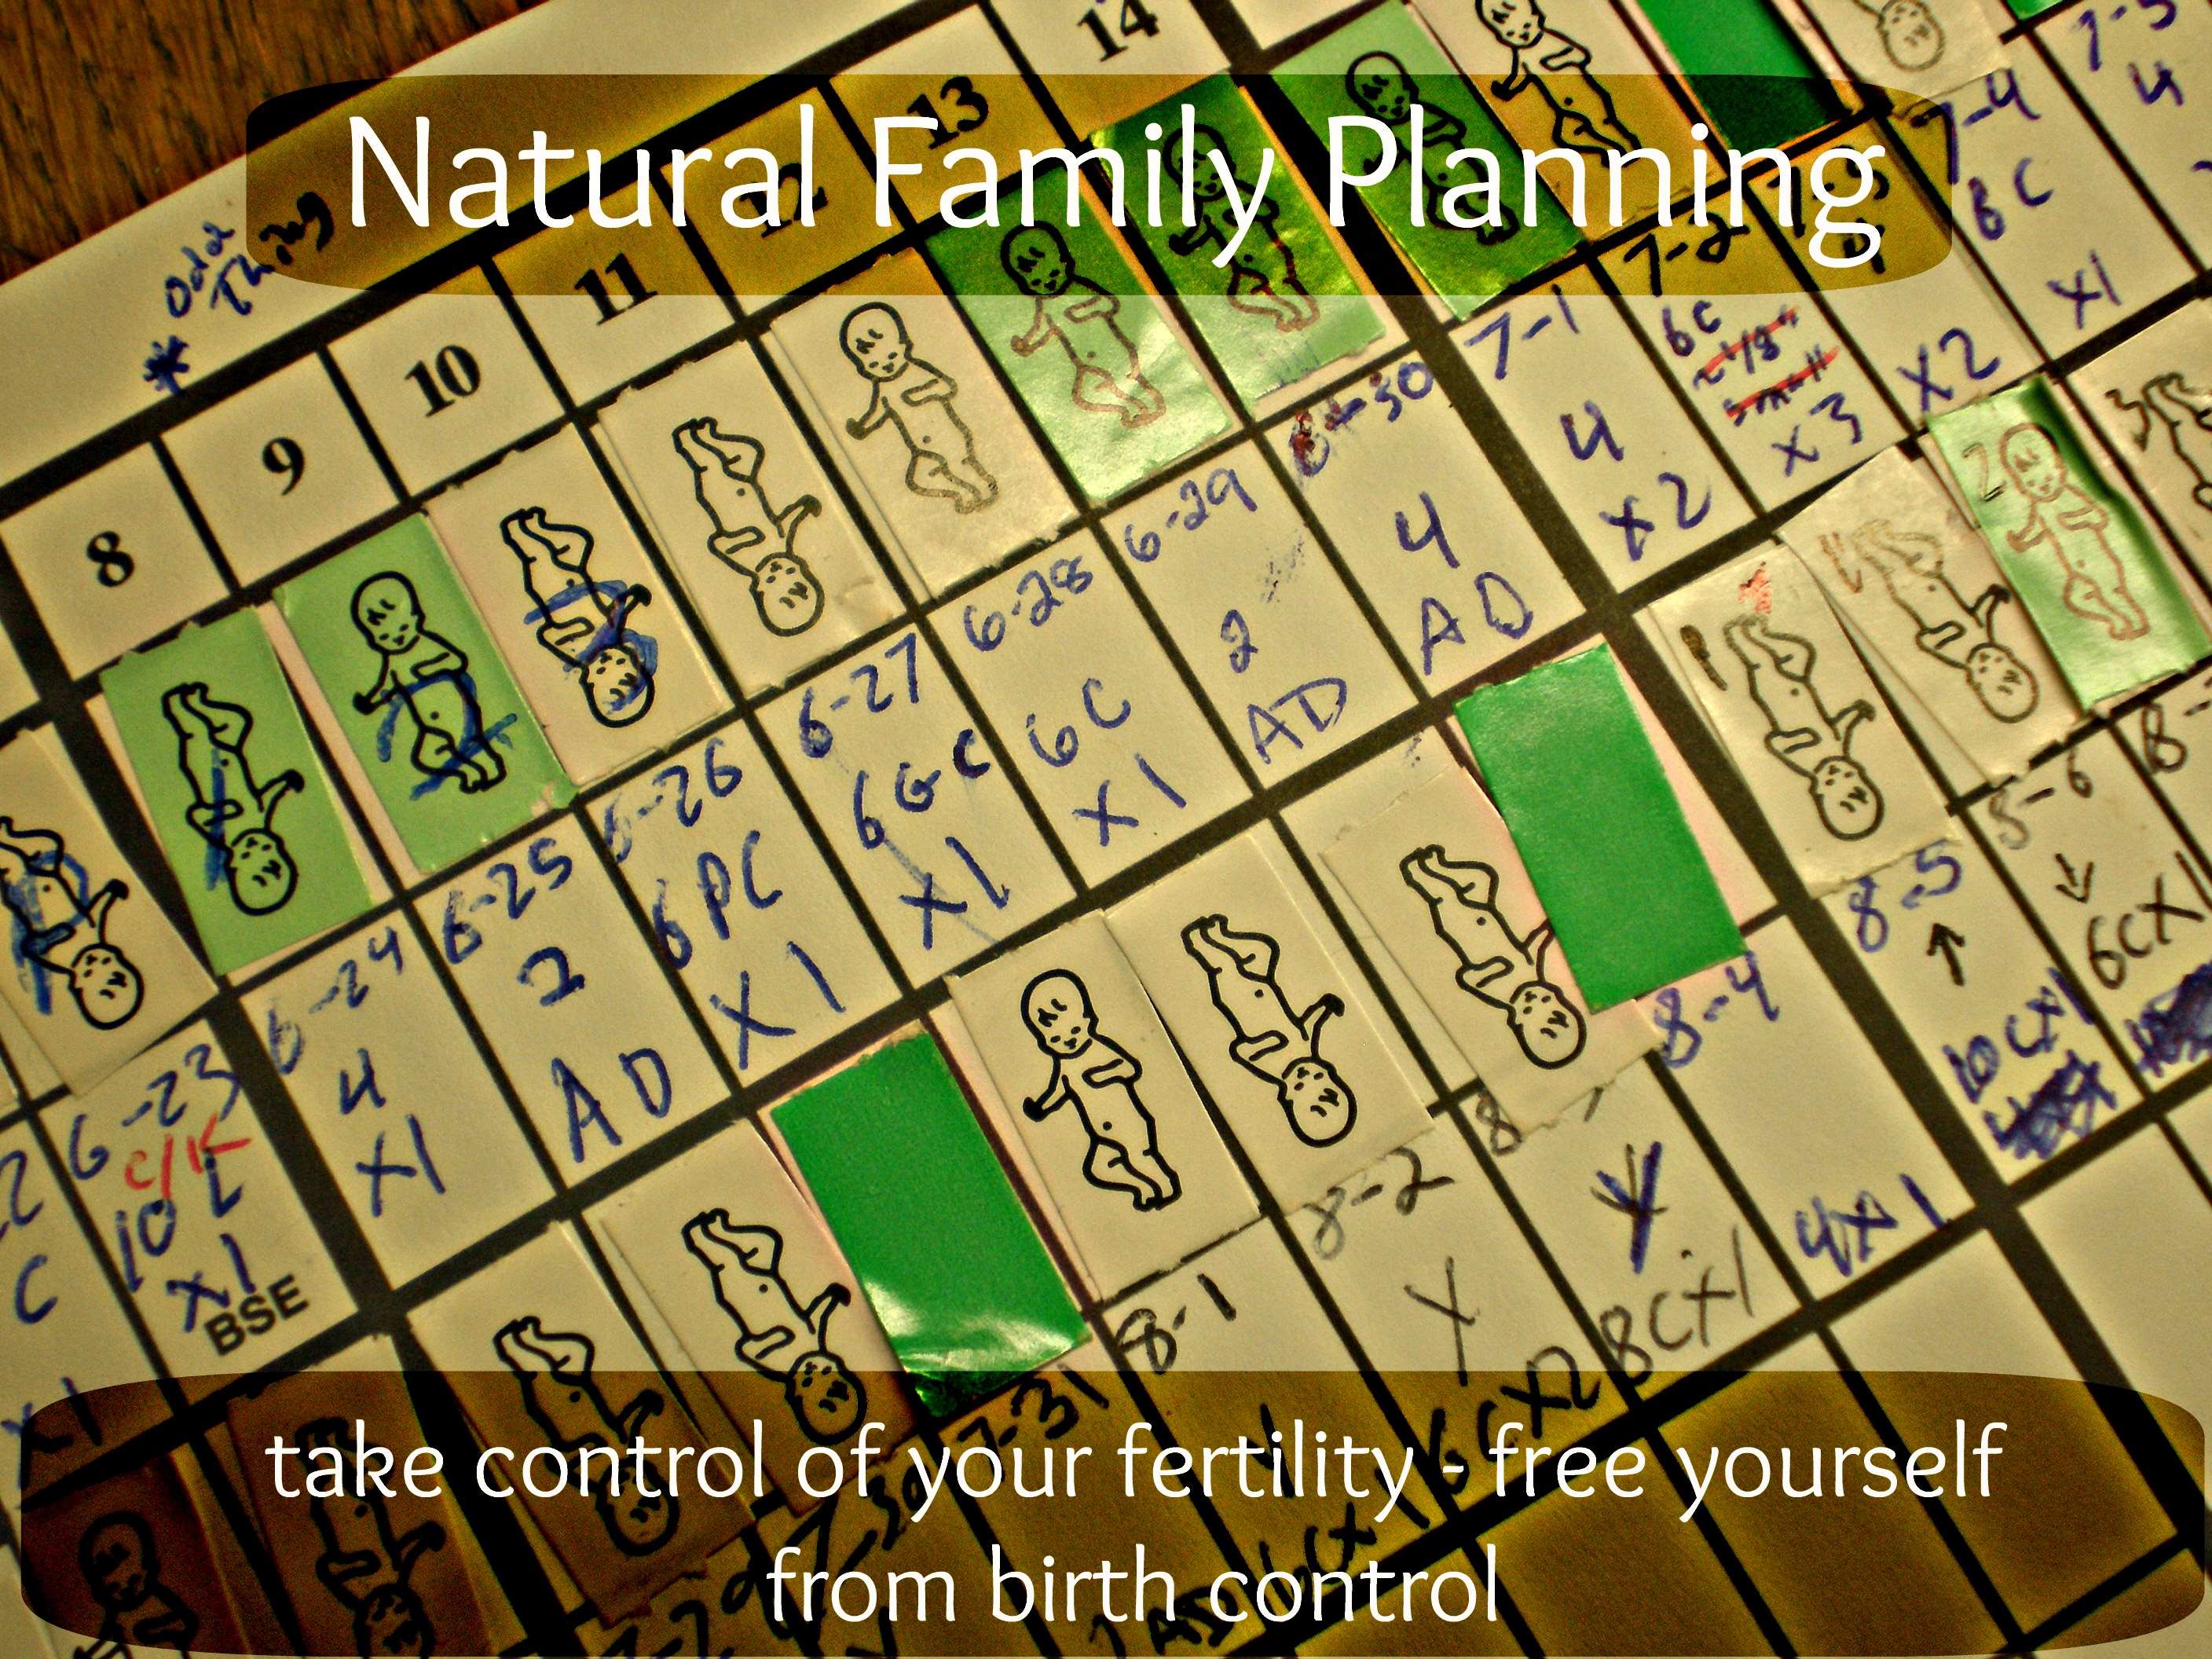 Natural Family Planning - Free yourself from birth control | Healthy People Healthy Planet